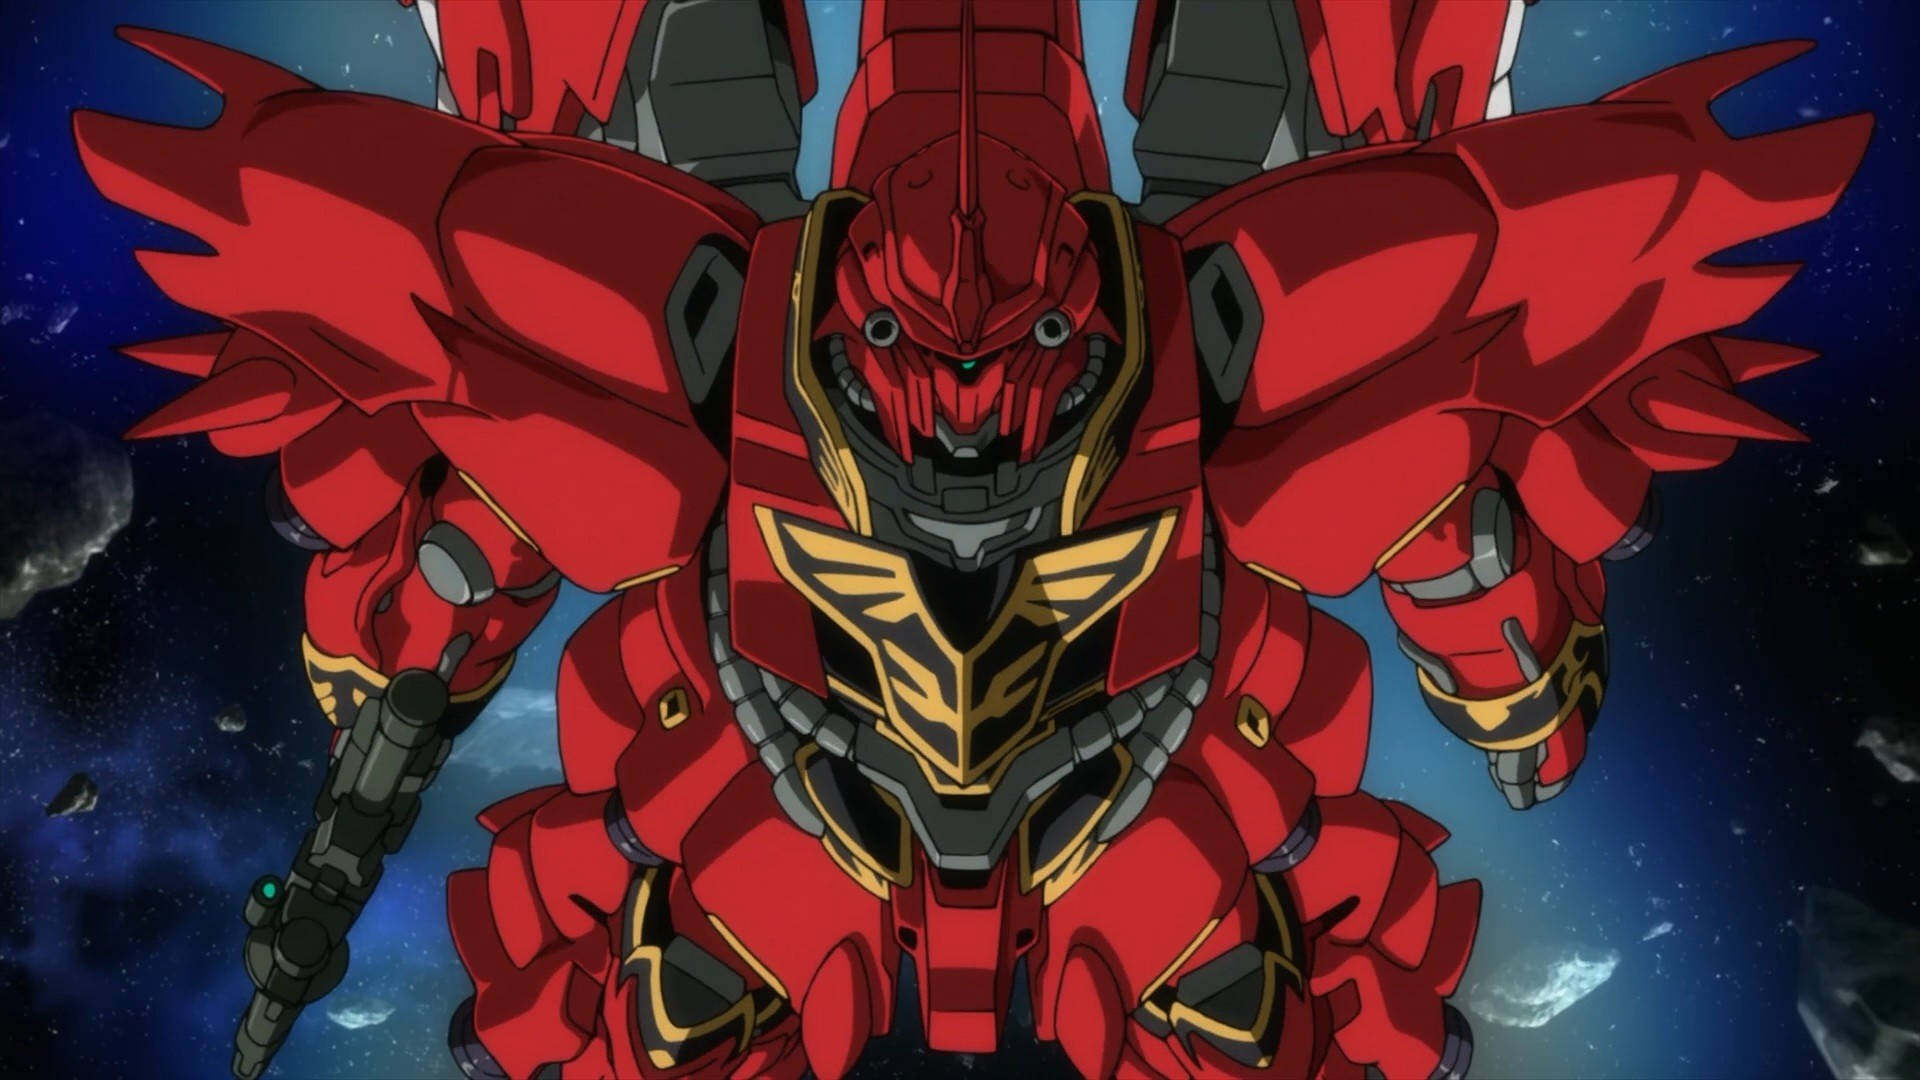 Red Mobile Suit Gundam In Space